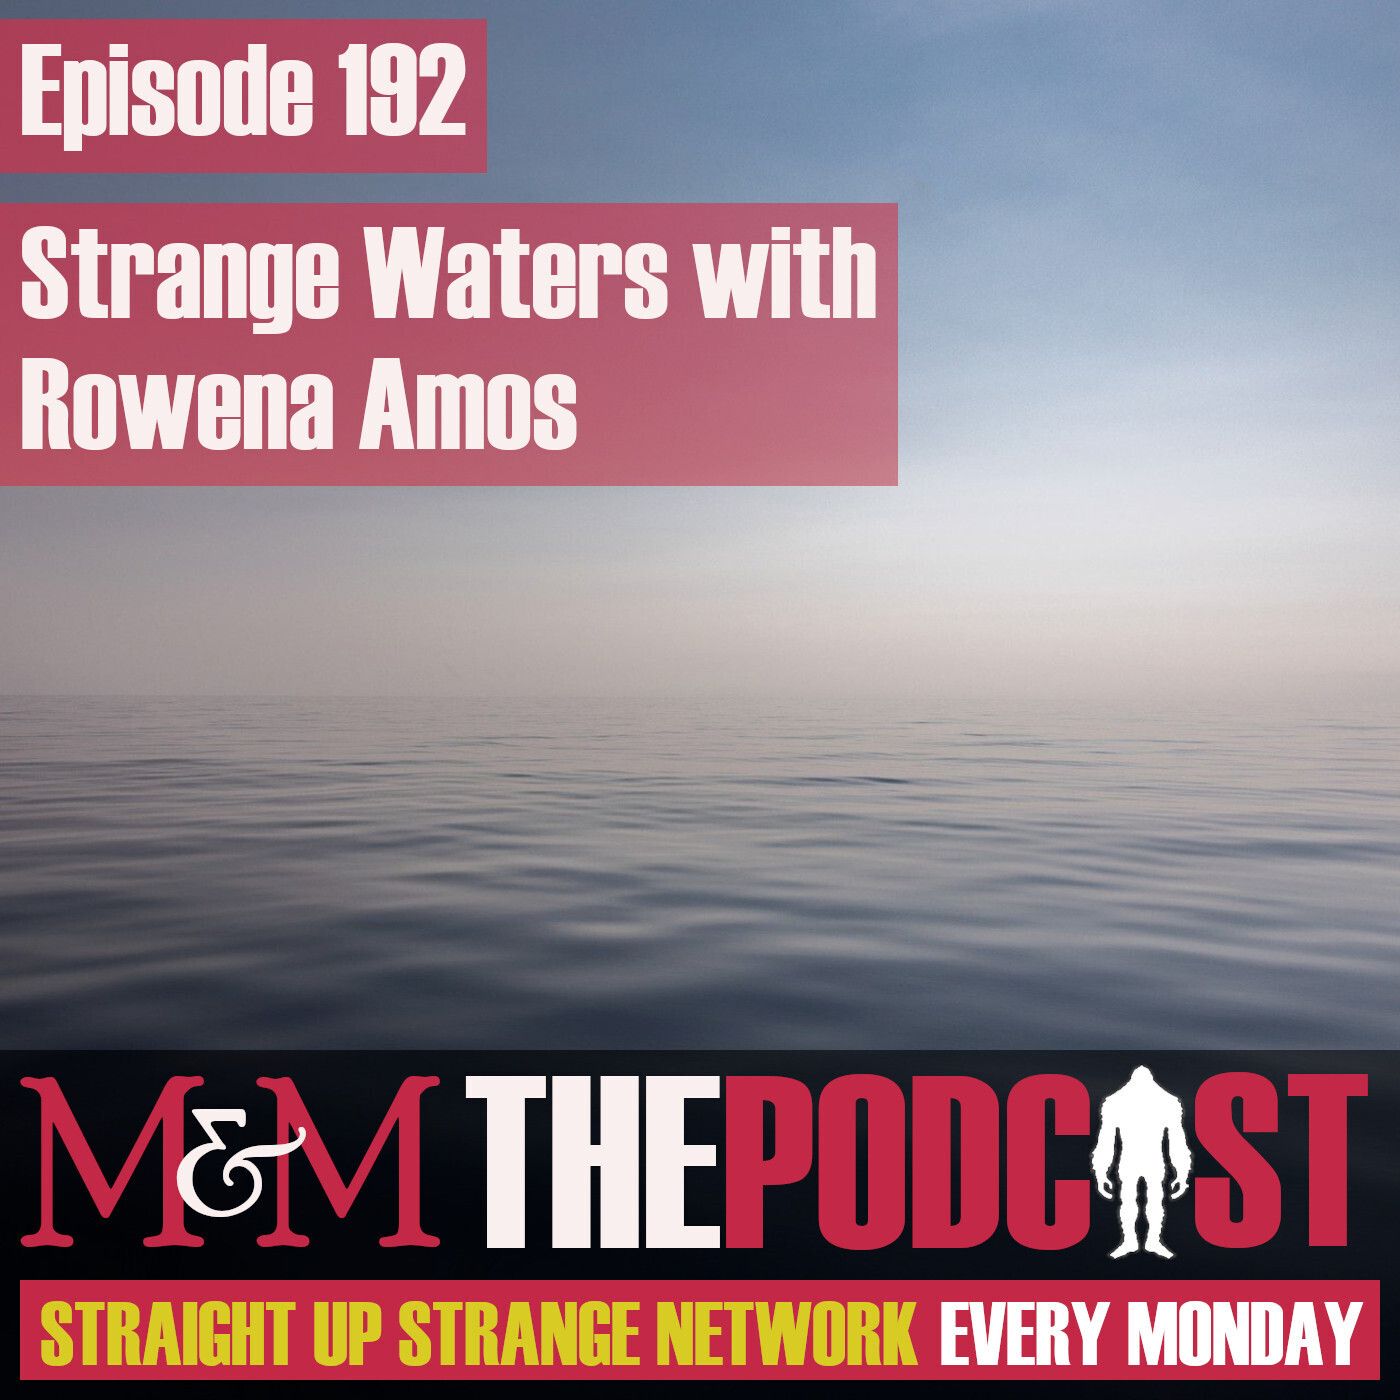 Mysteries and Monsters: Episode 192 Strange Waters with Rowena Amos